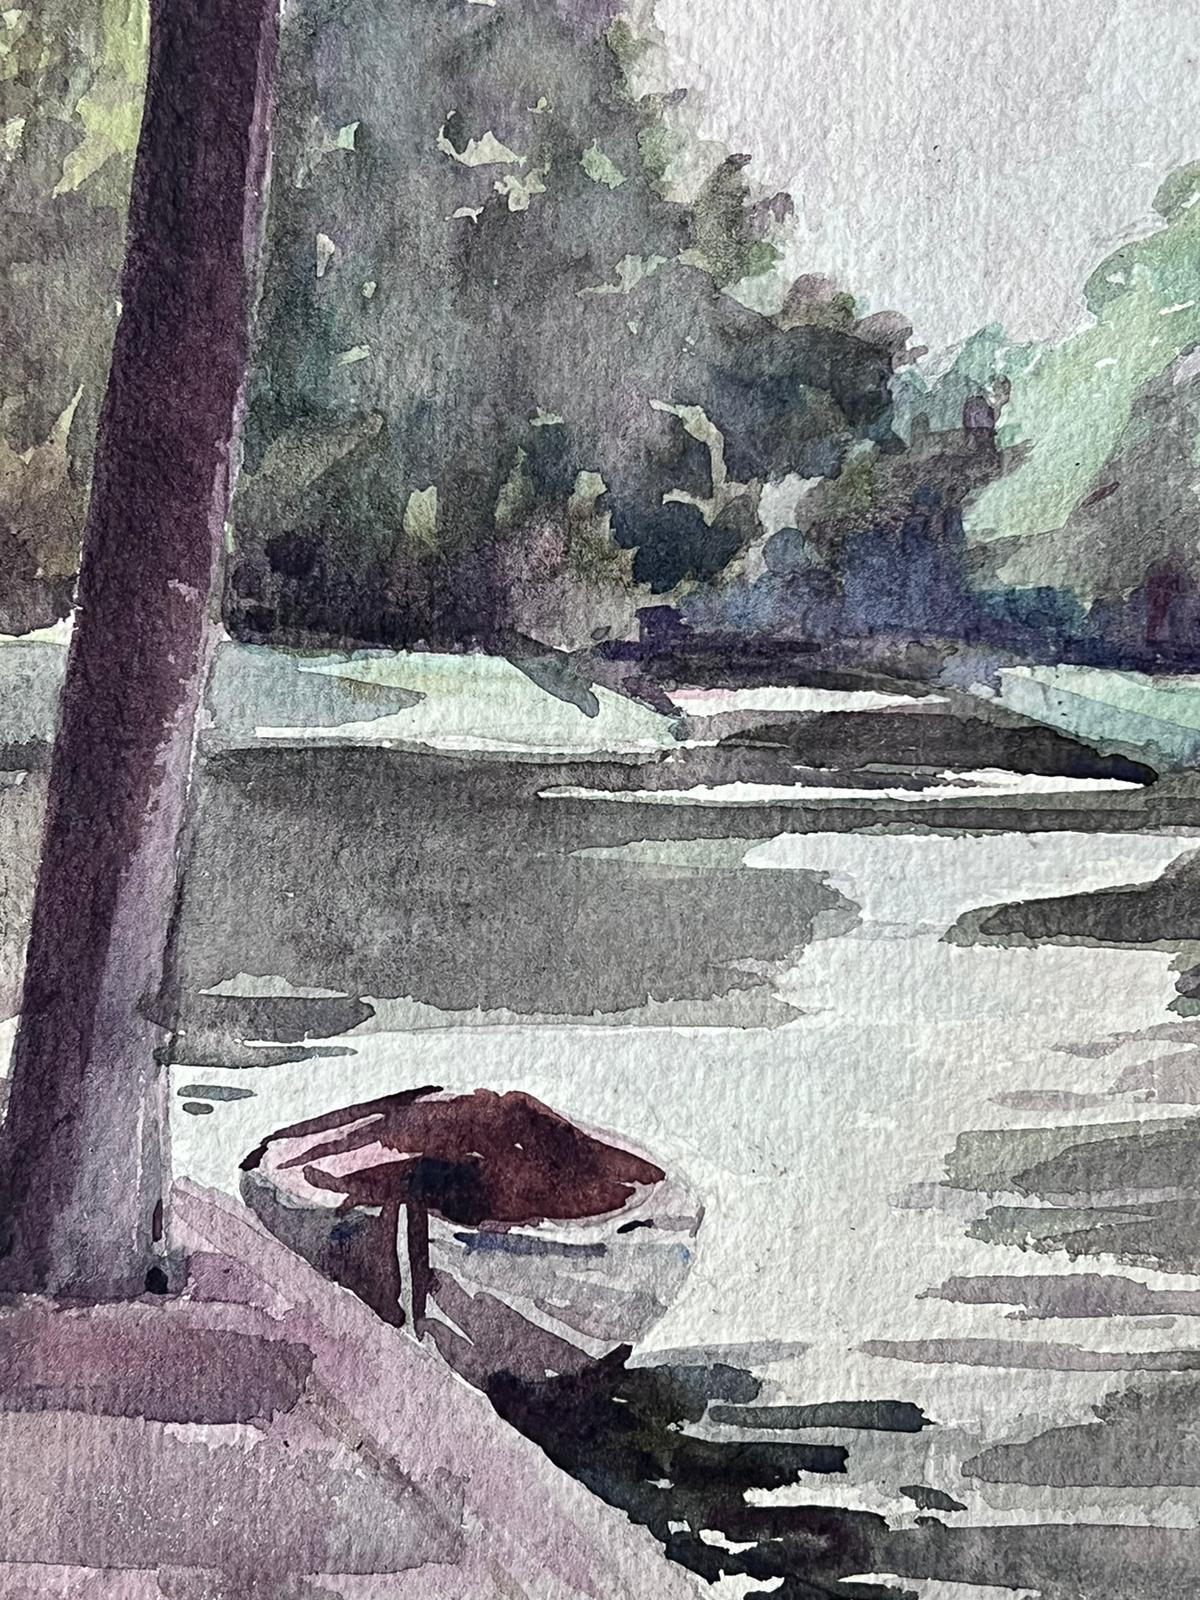 Vintage French Watercolour Painting
by Louise Alix (French, 1888-1980) *see notes below
provenance stamp to the back 
watercolour painting on artist paper, unframed
measures: 10 inches high by 8 inches wide
condition: overall very good and sound, a